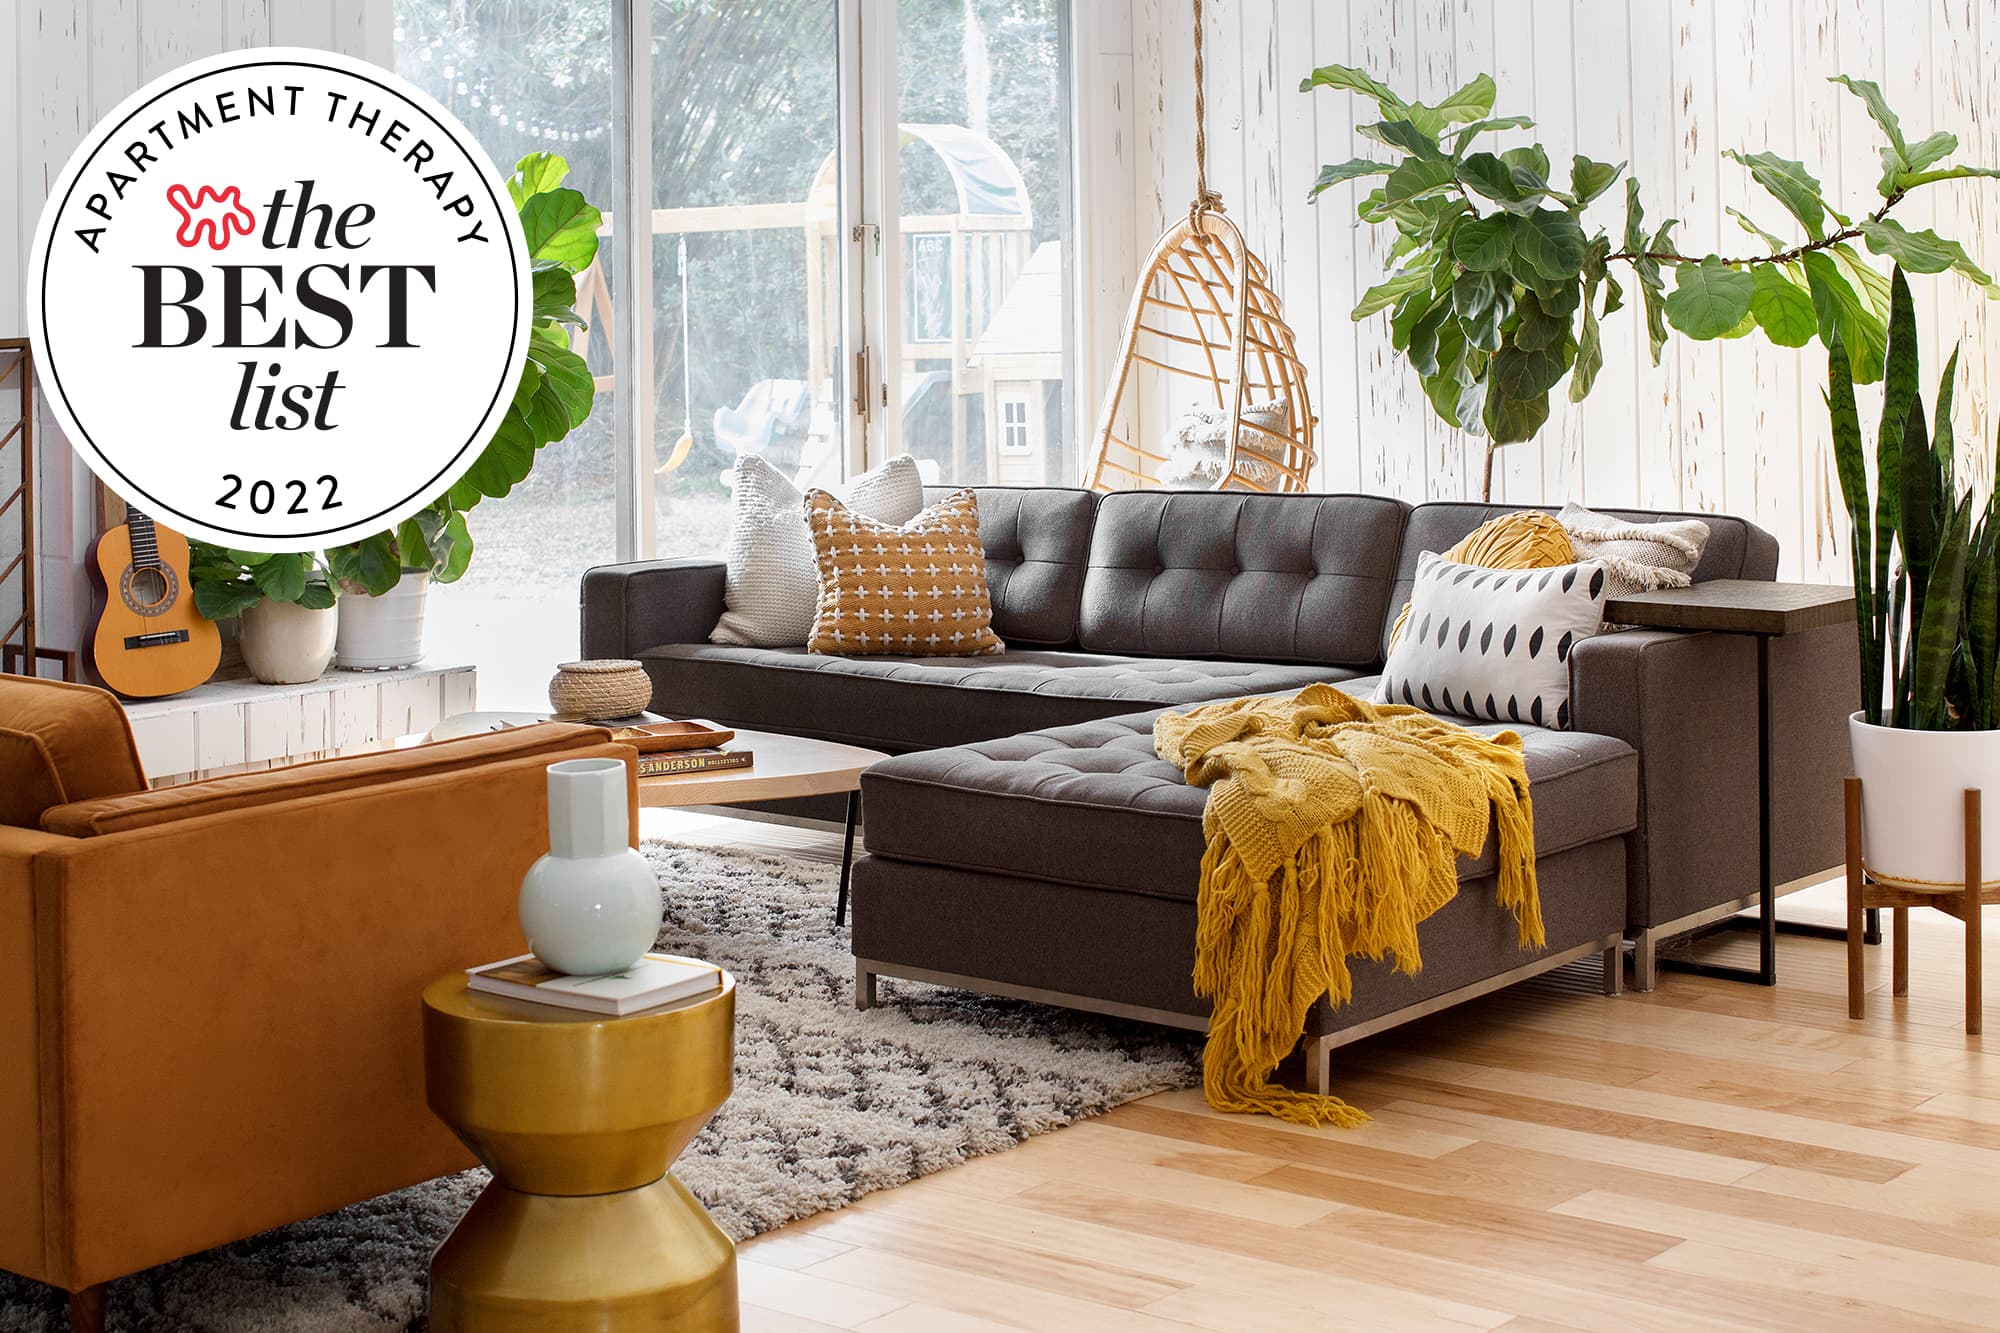 The Best Editor-Tested Home Products of 2022 | Apartment Therapy